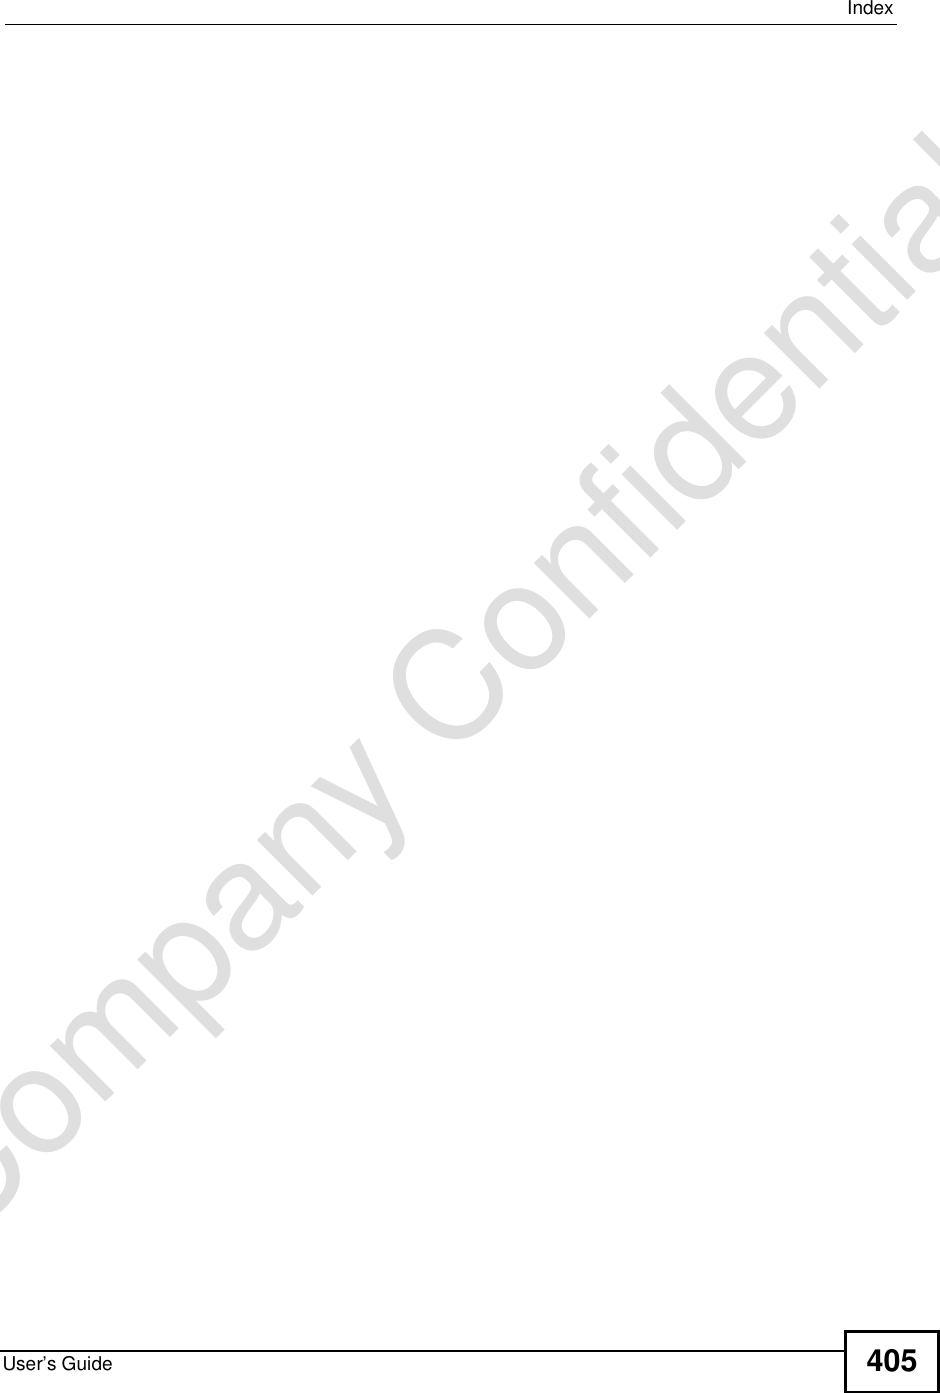 IndexUser’s Guide 405Company Confidential